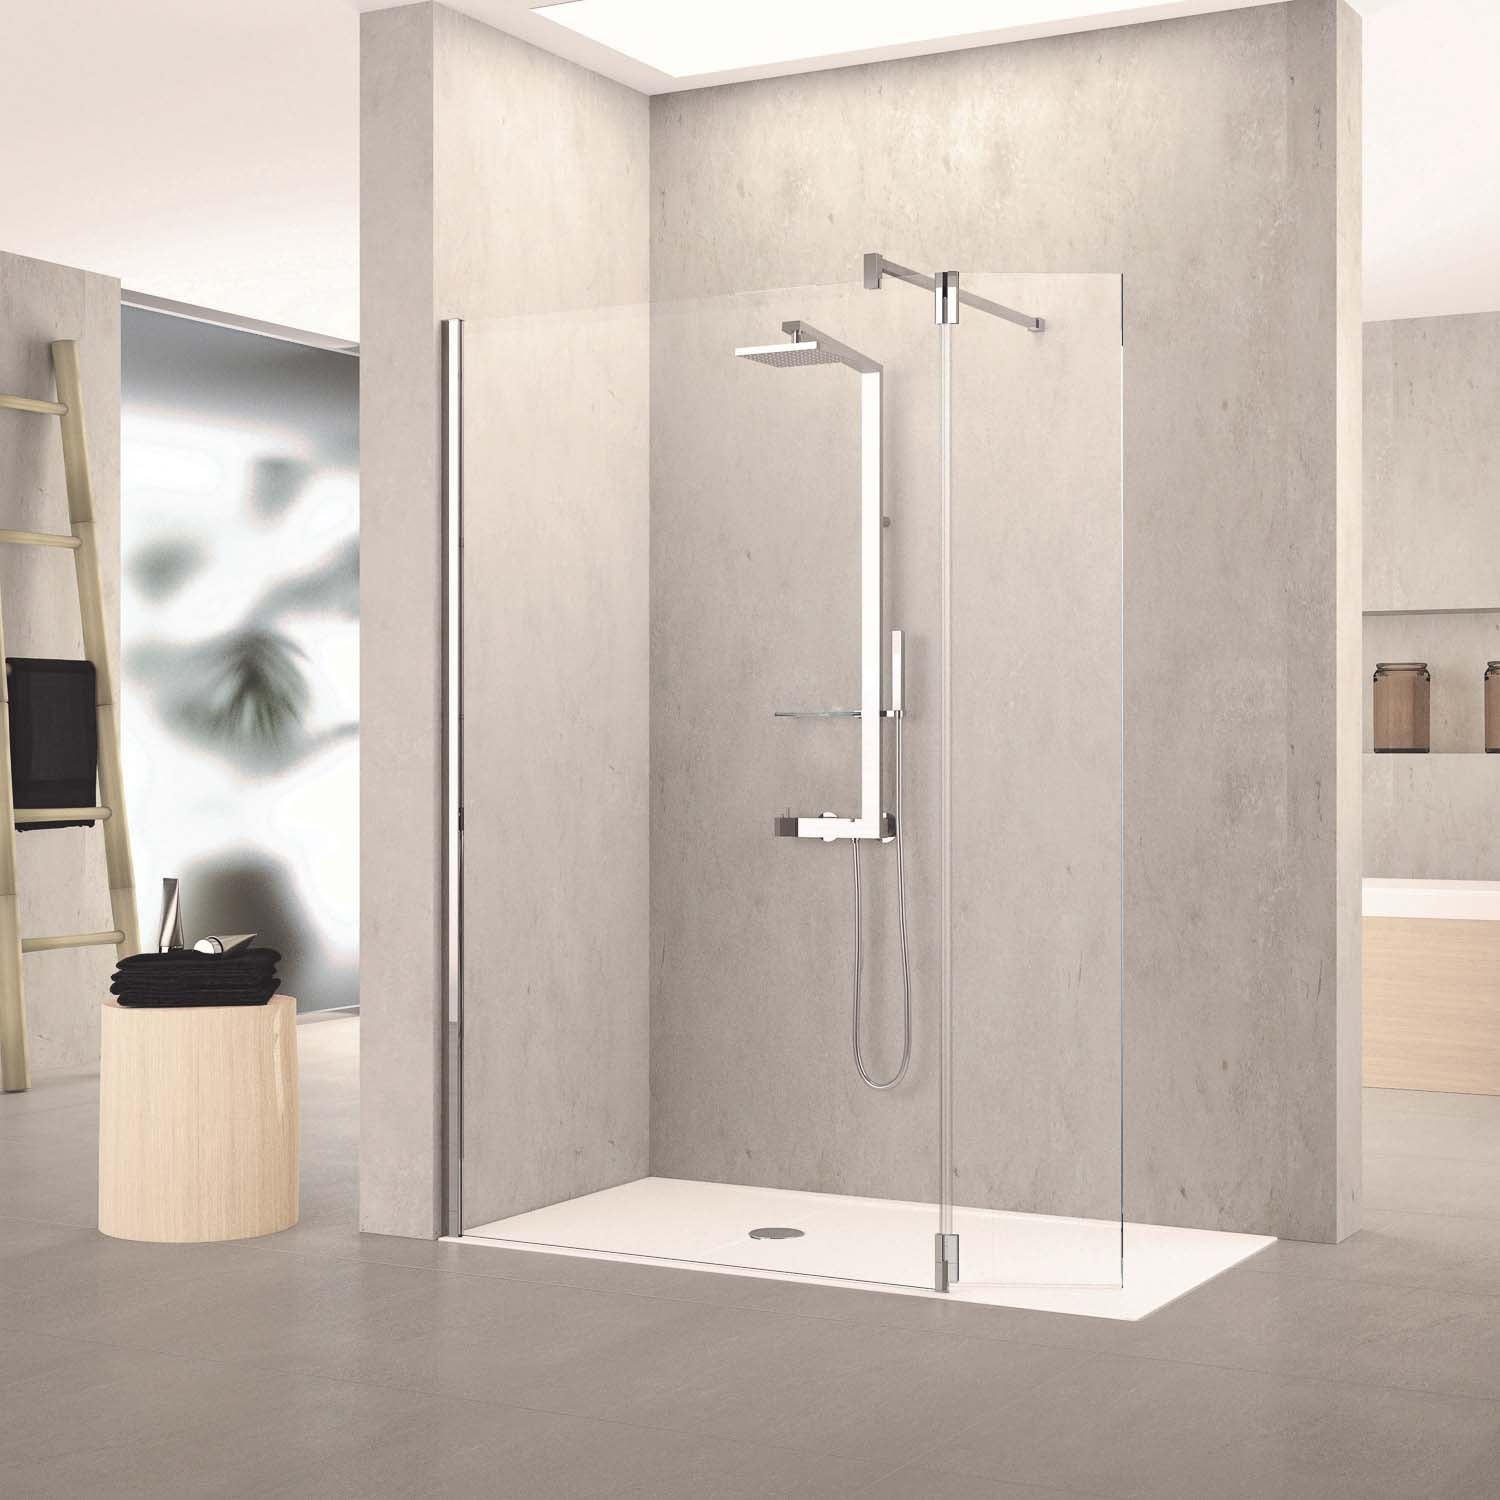 670-700mm Ergo Wet Room Screen Clear Glass with a chrome finish lifestyle image